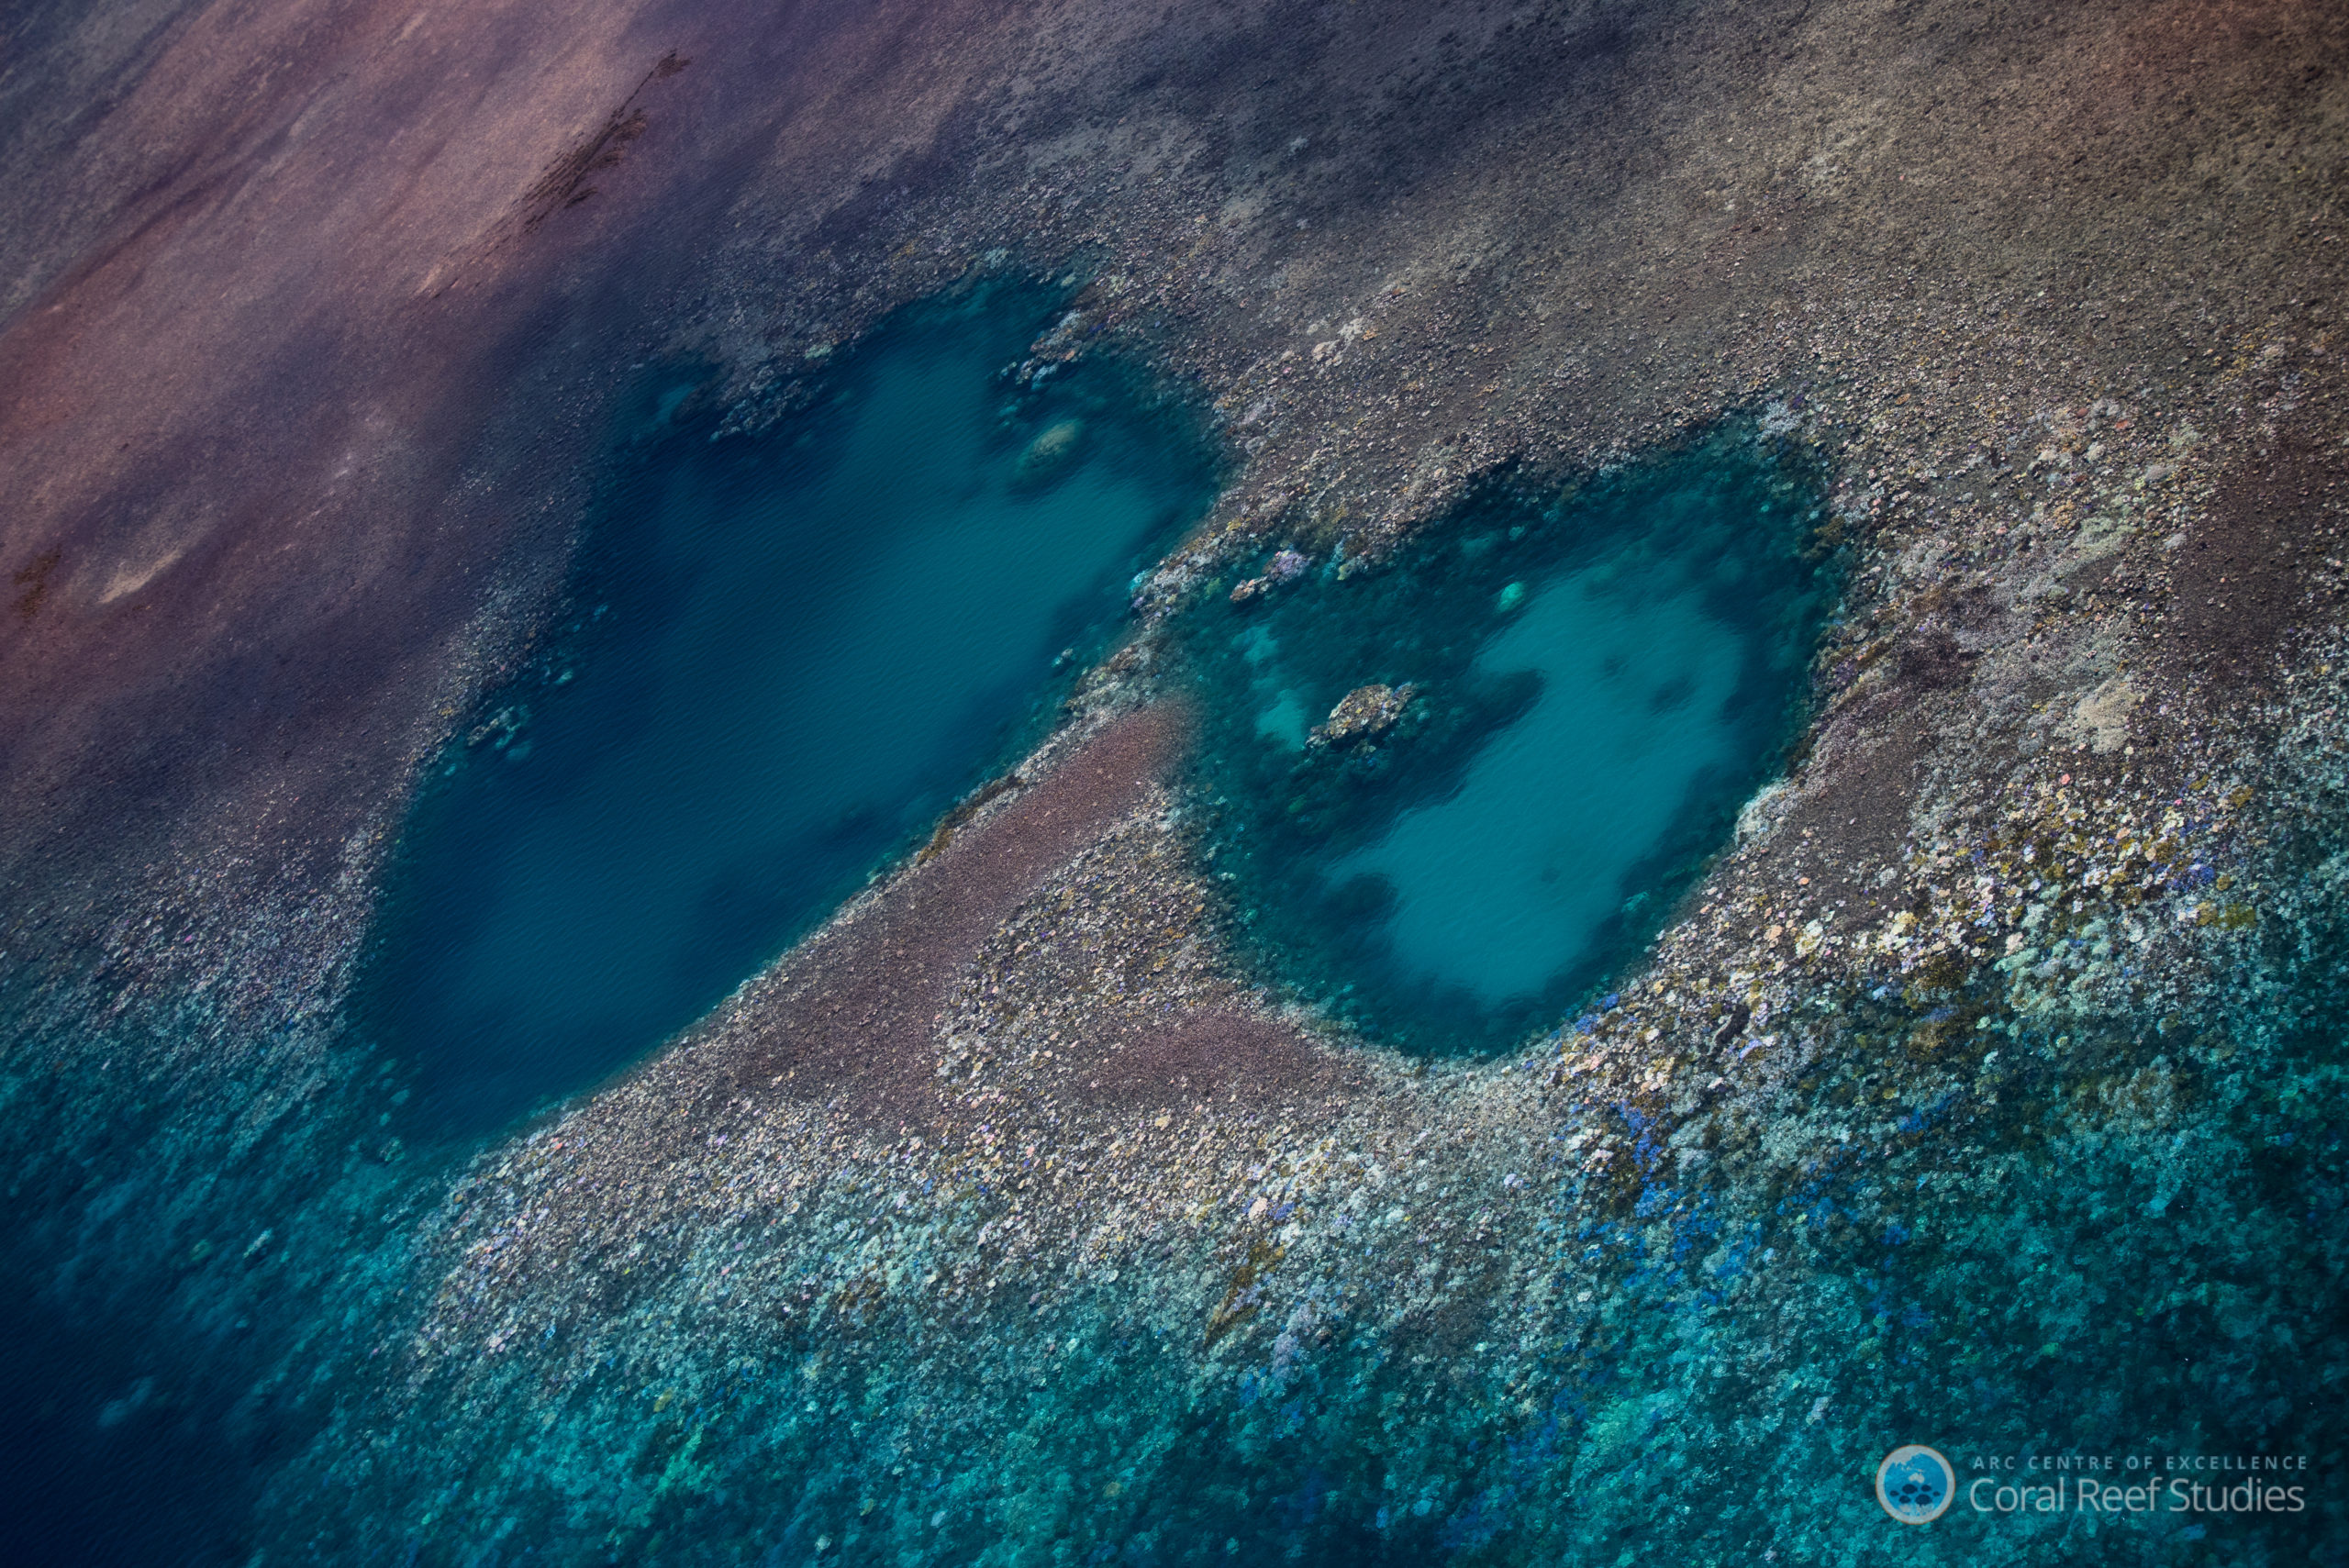 A Nightmare Is Unfolding In The Great Barrier Reef